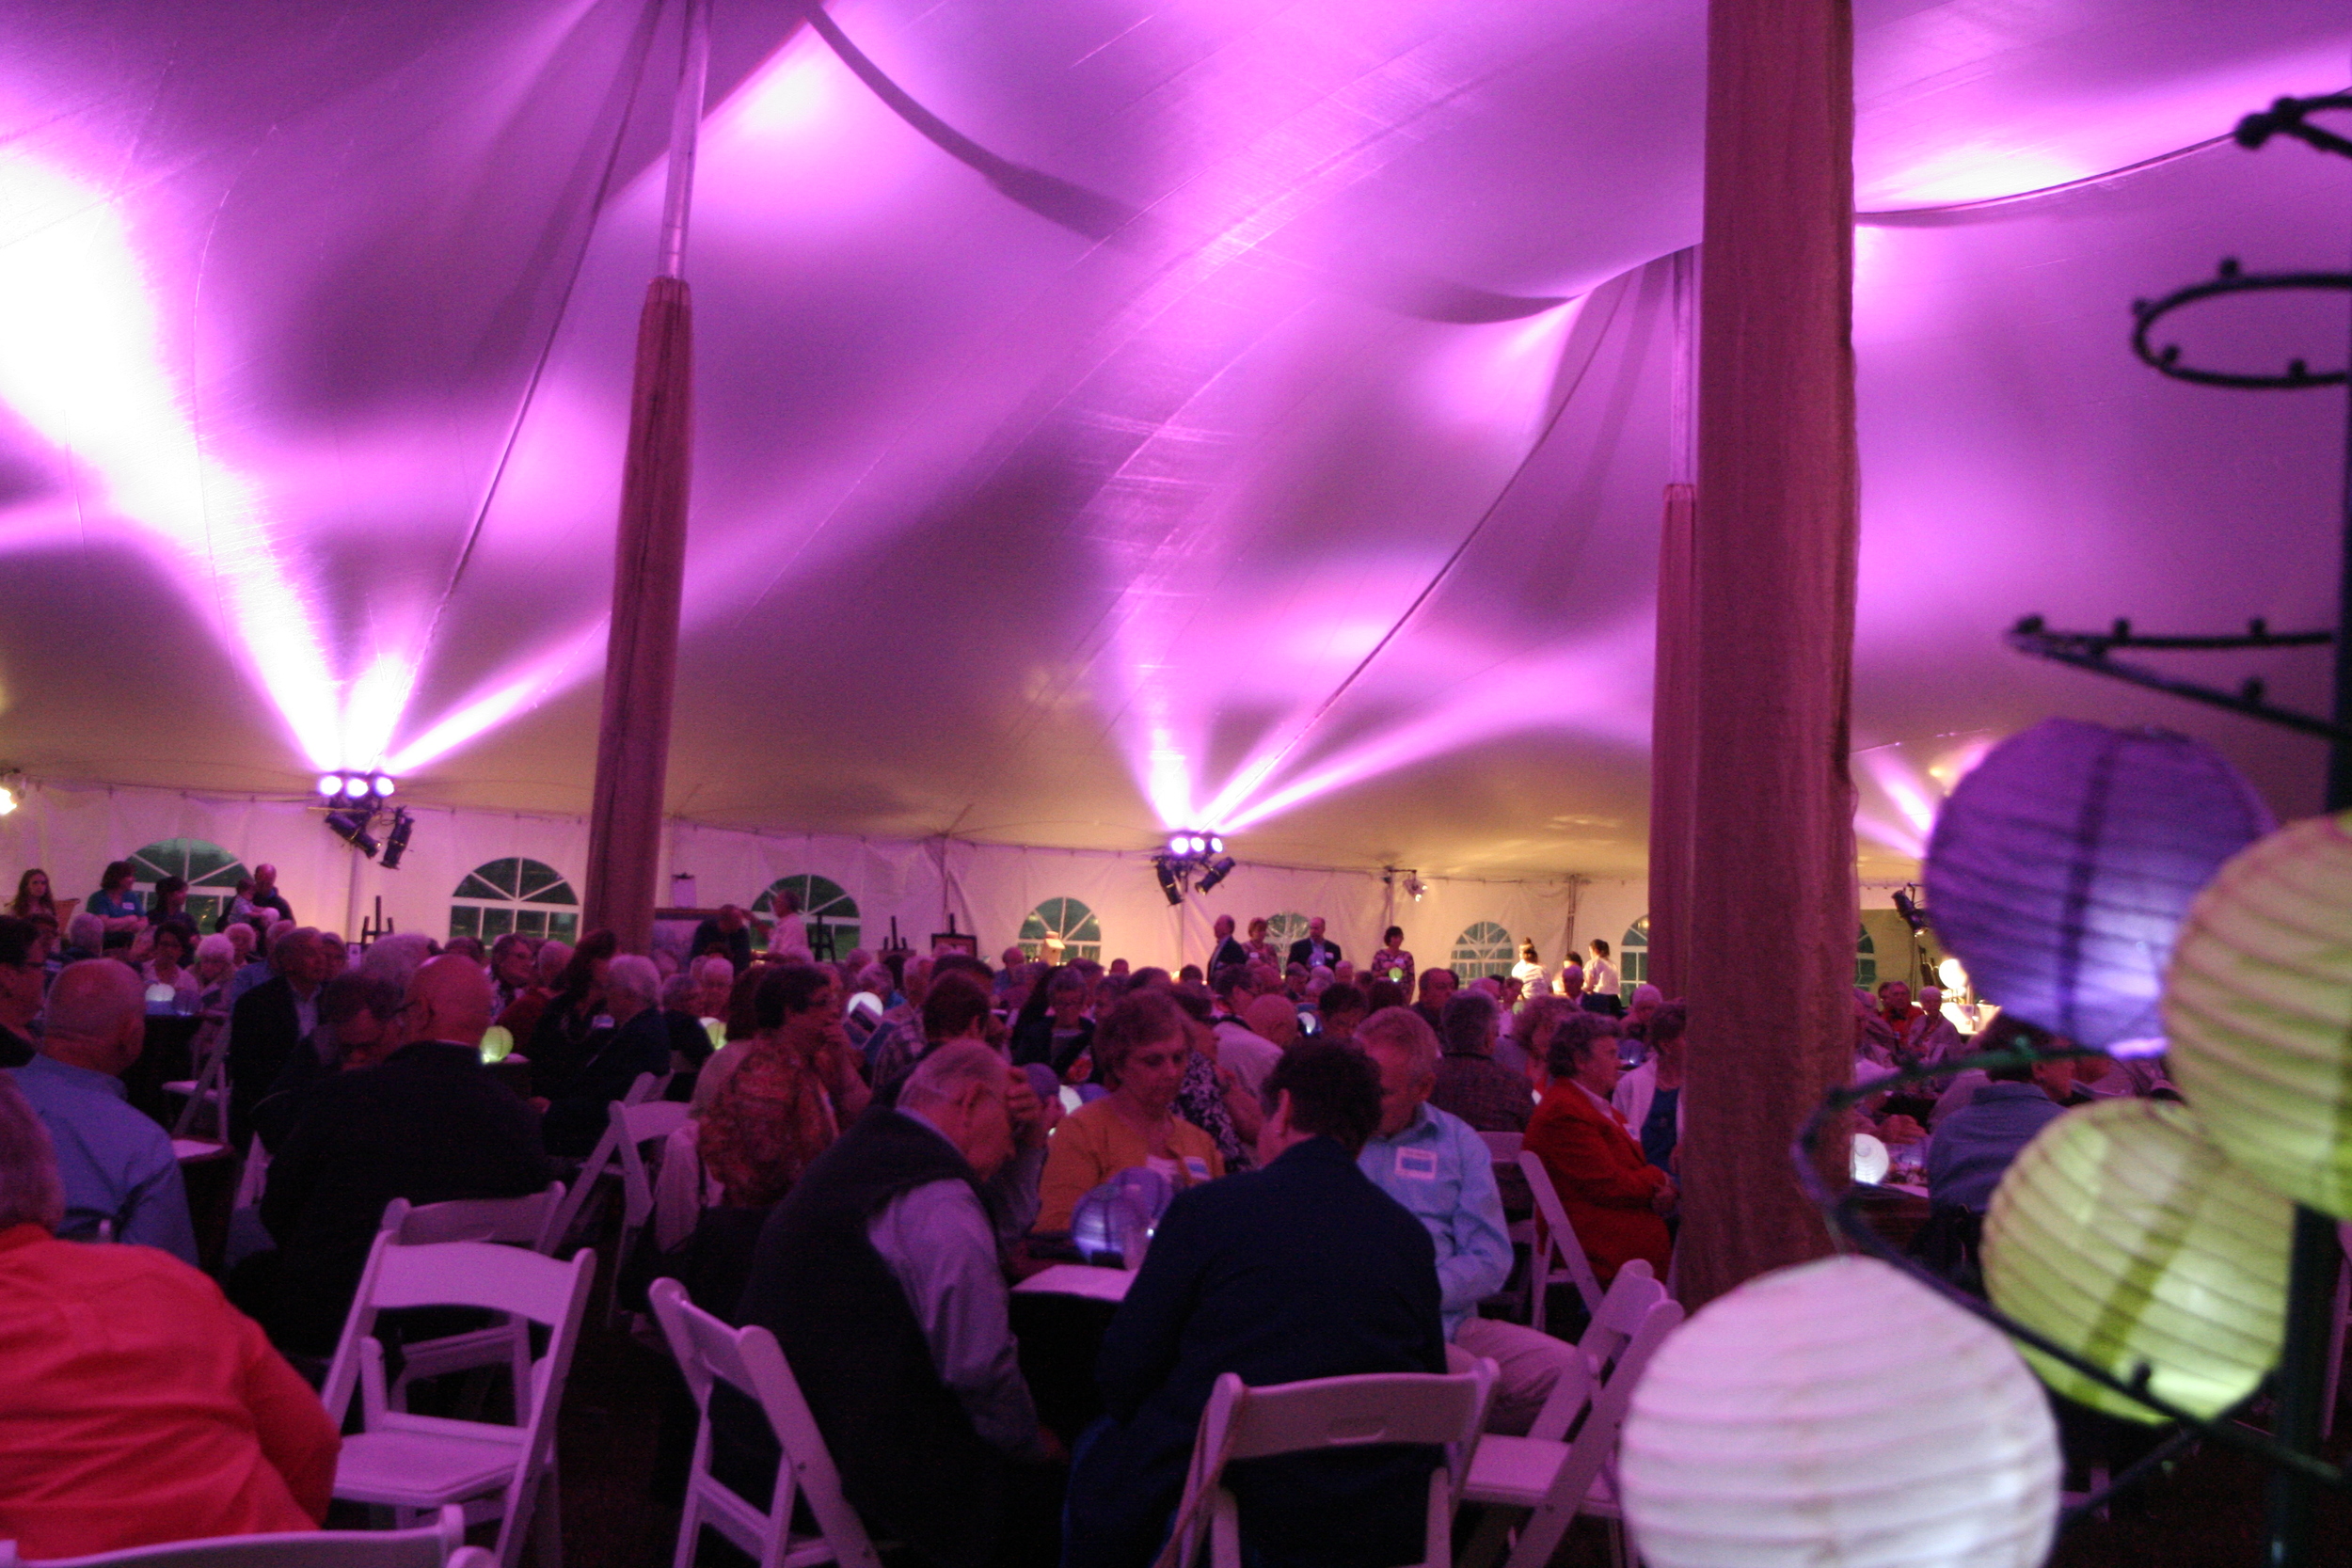 Rental tent with tables, chairs and lighting